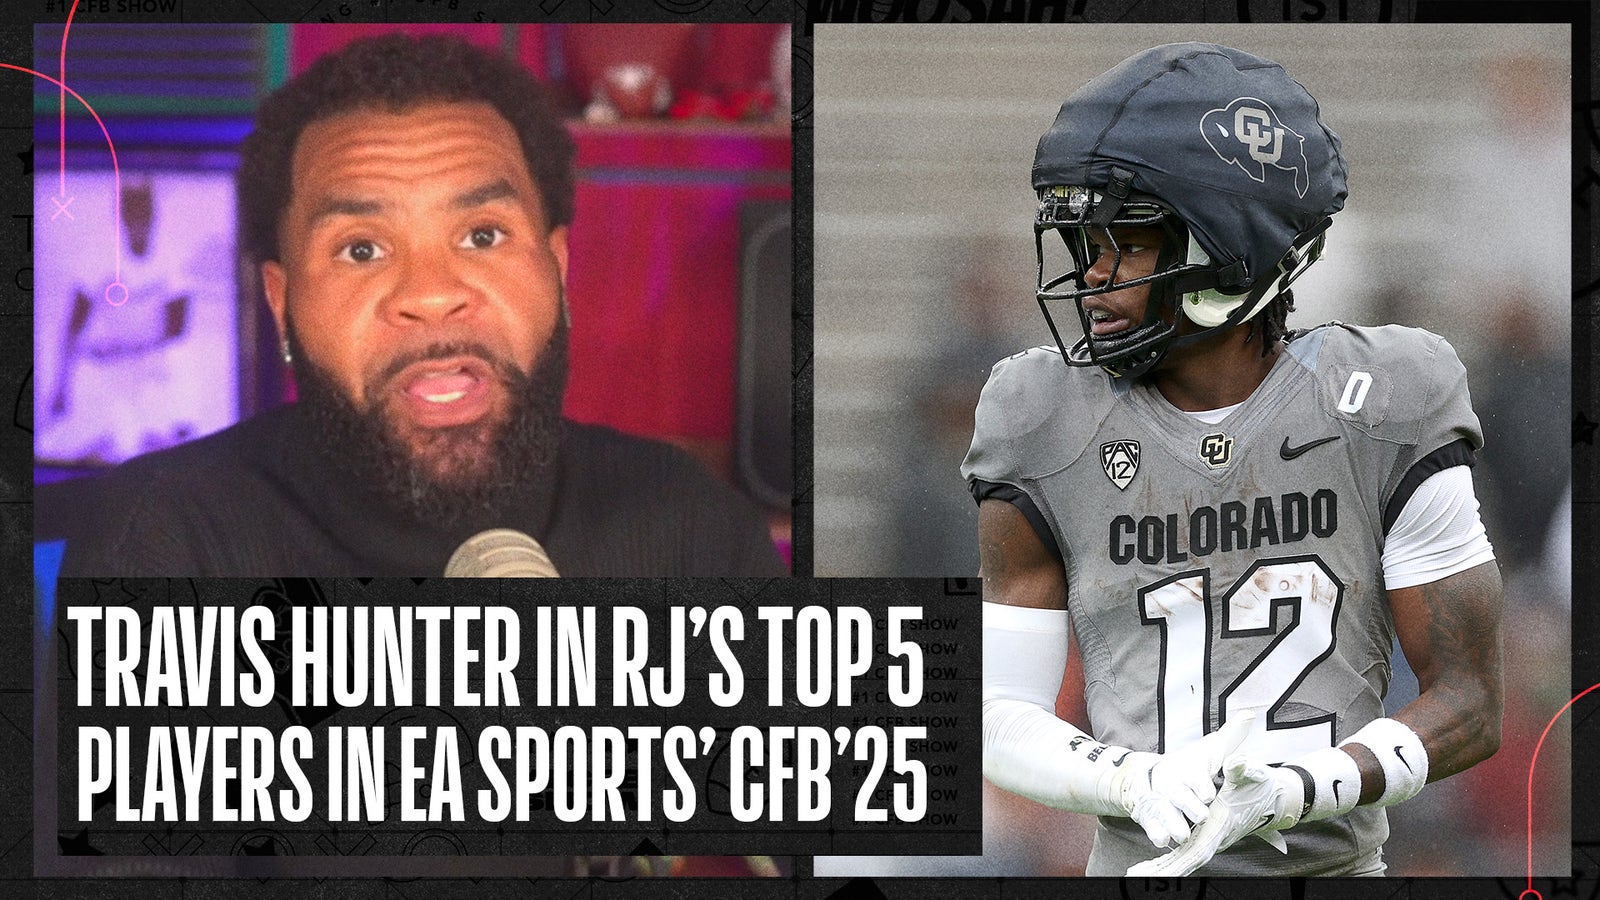 RJ Young predicts the top 5 players in EA Sports’ CFB 25